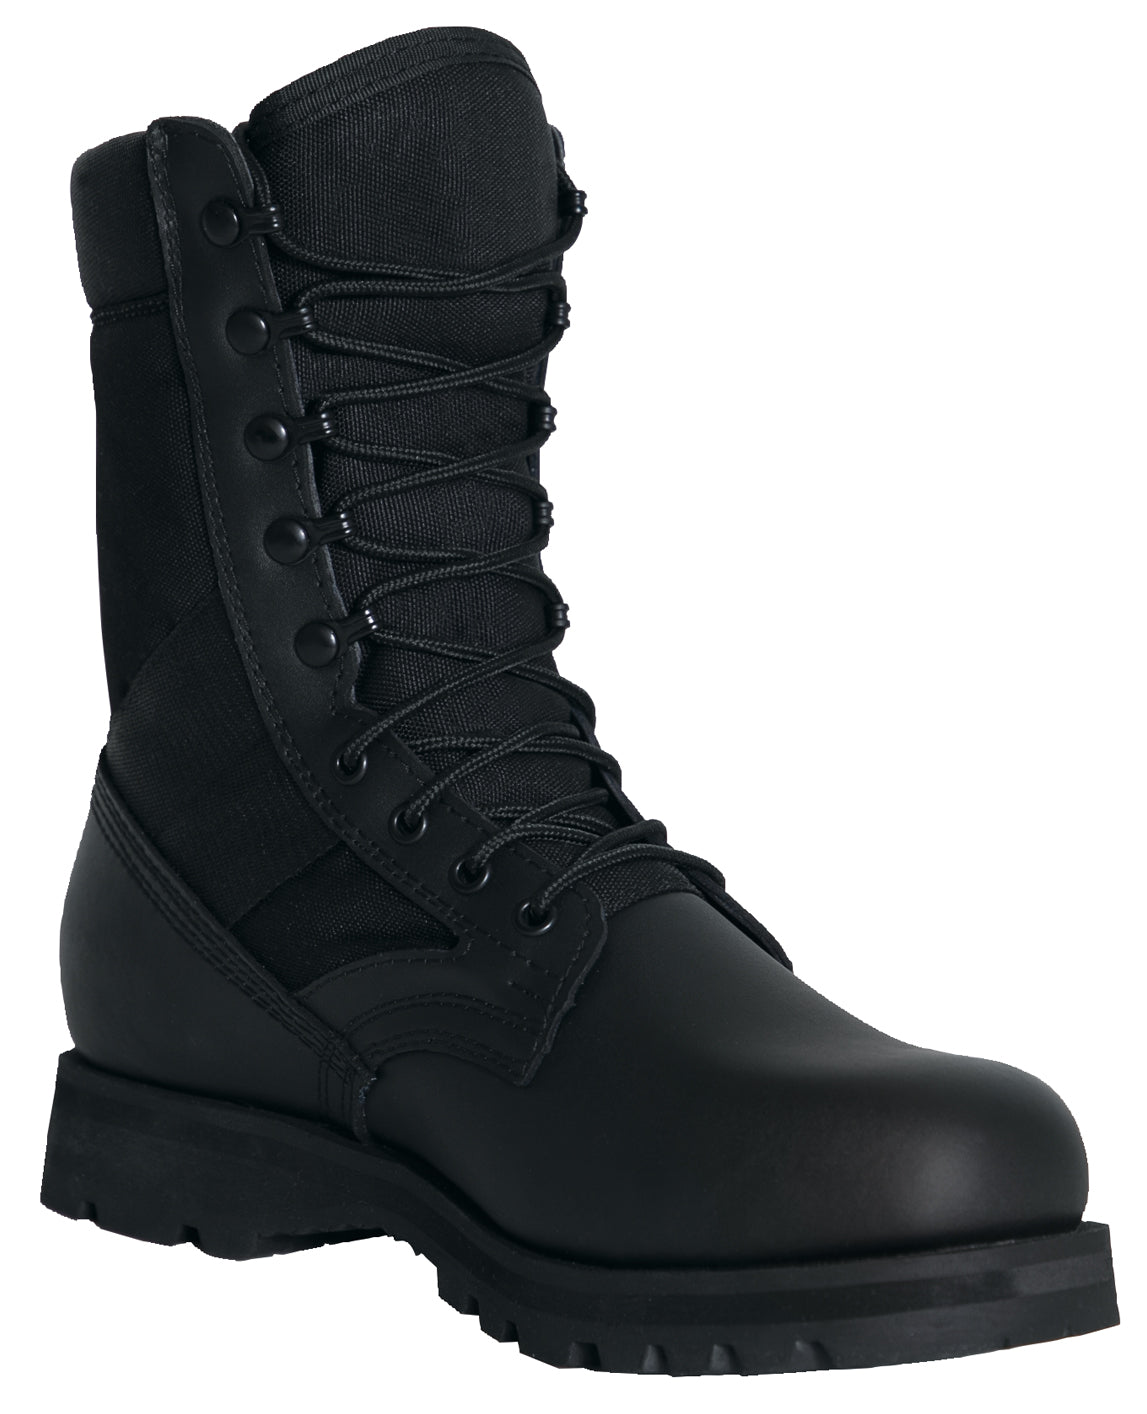 Sierra Sole Tactical Boots - 8 Inch